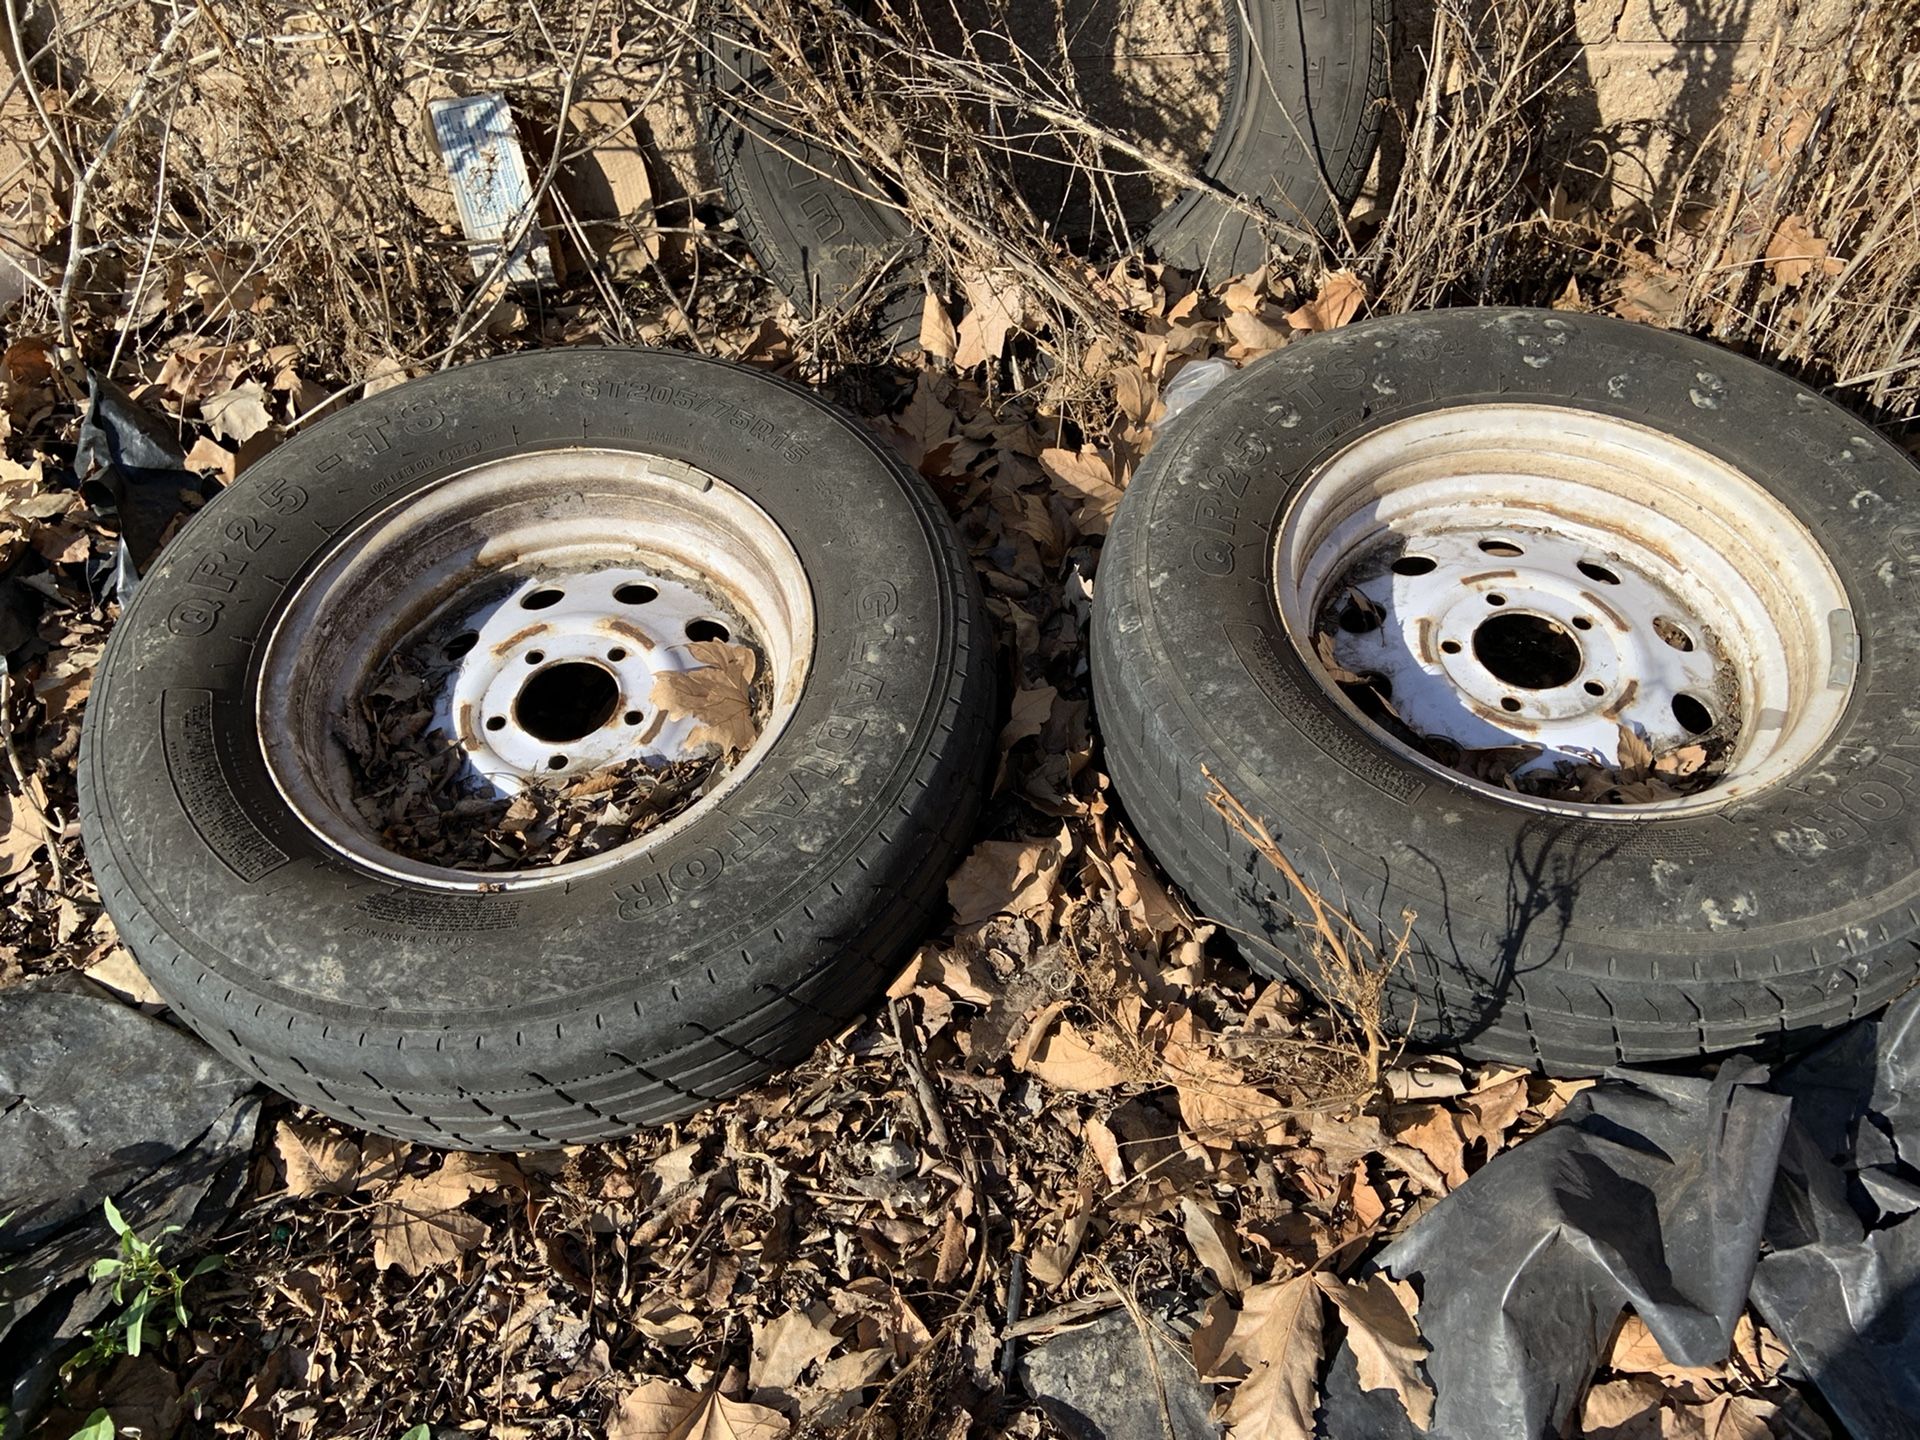 Tire and wheels for trailer